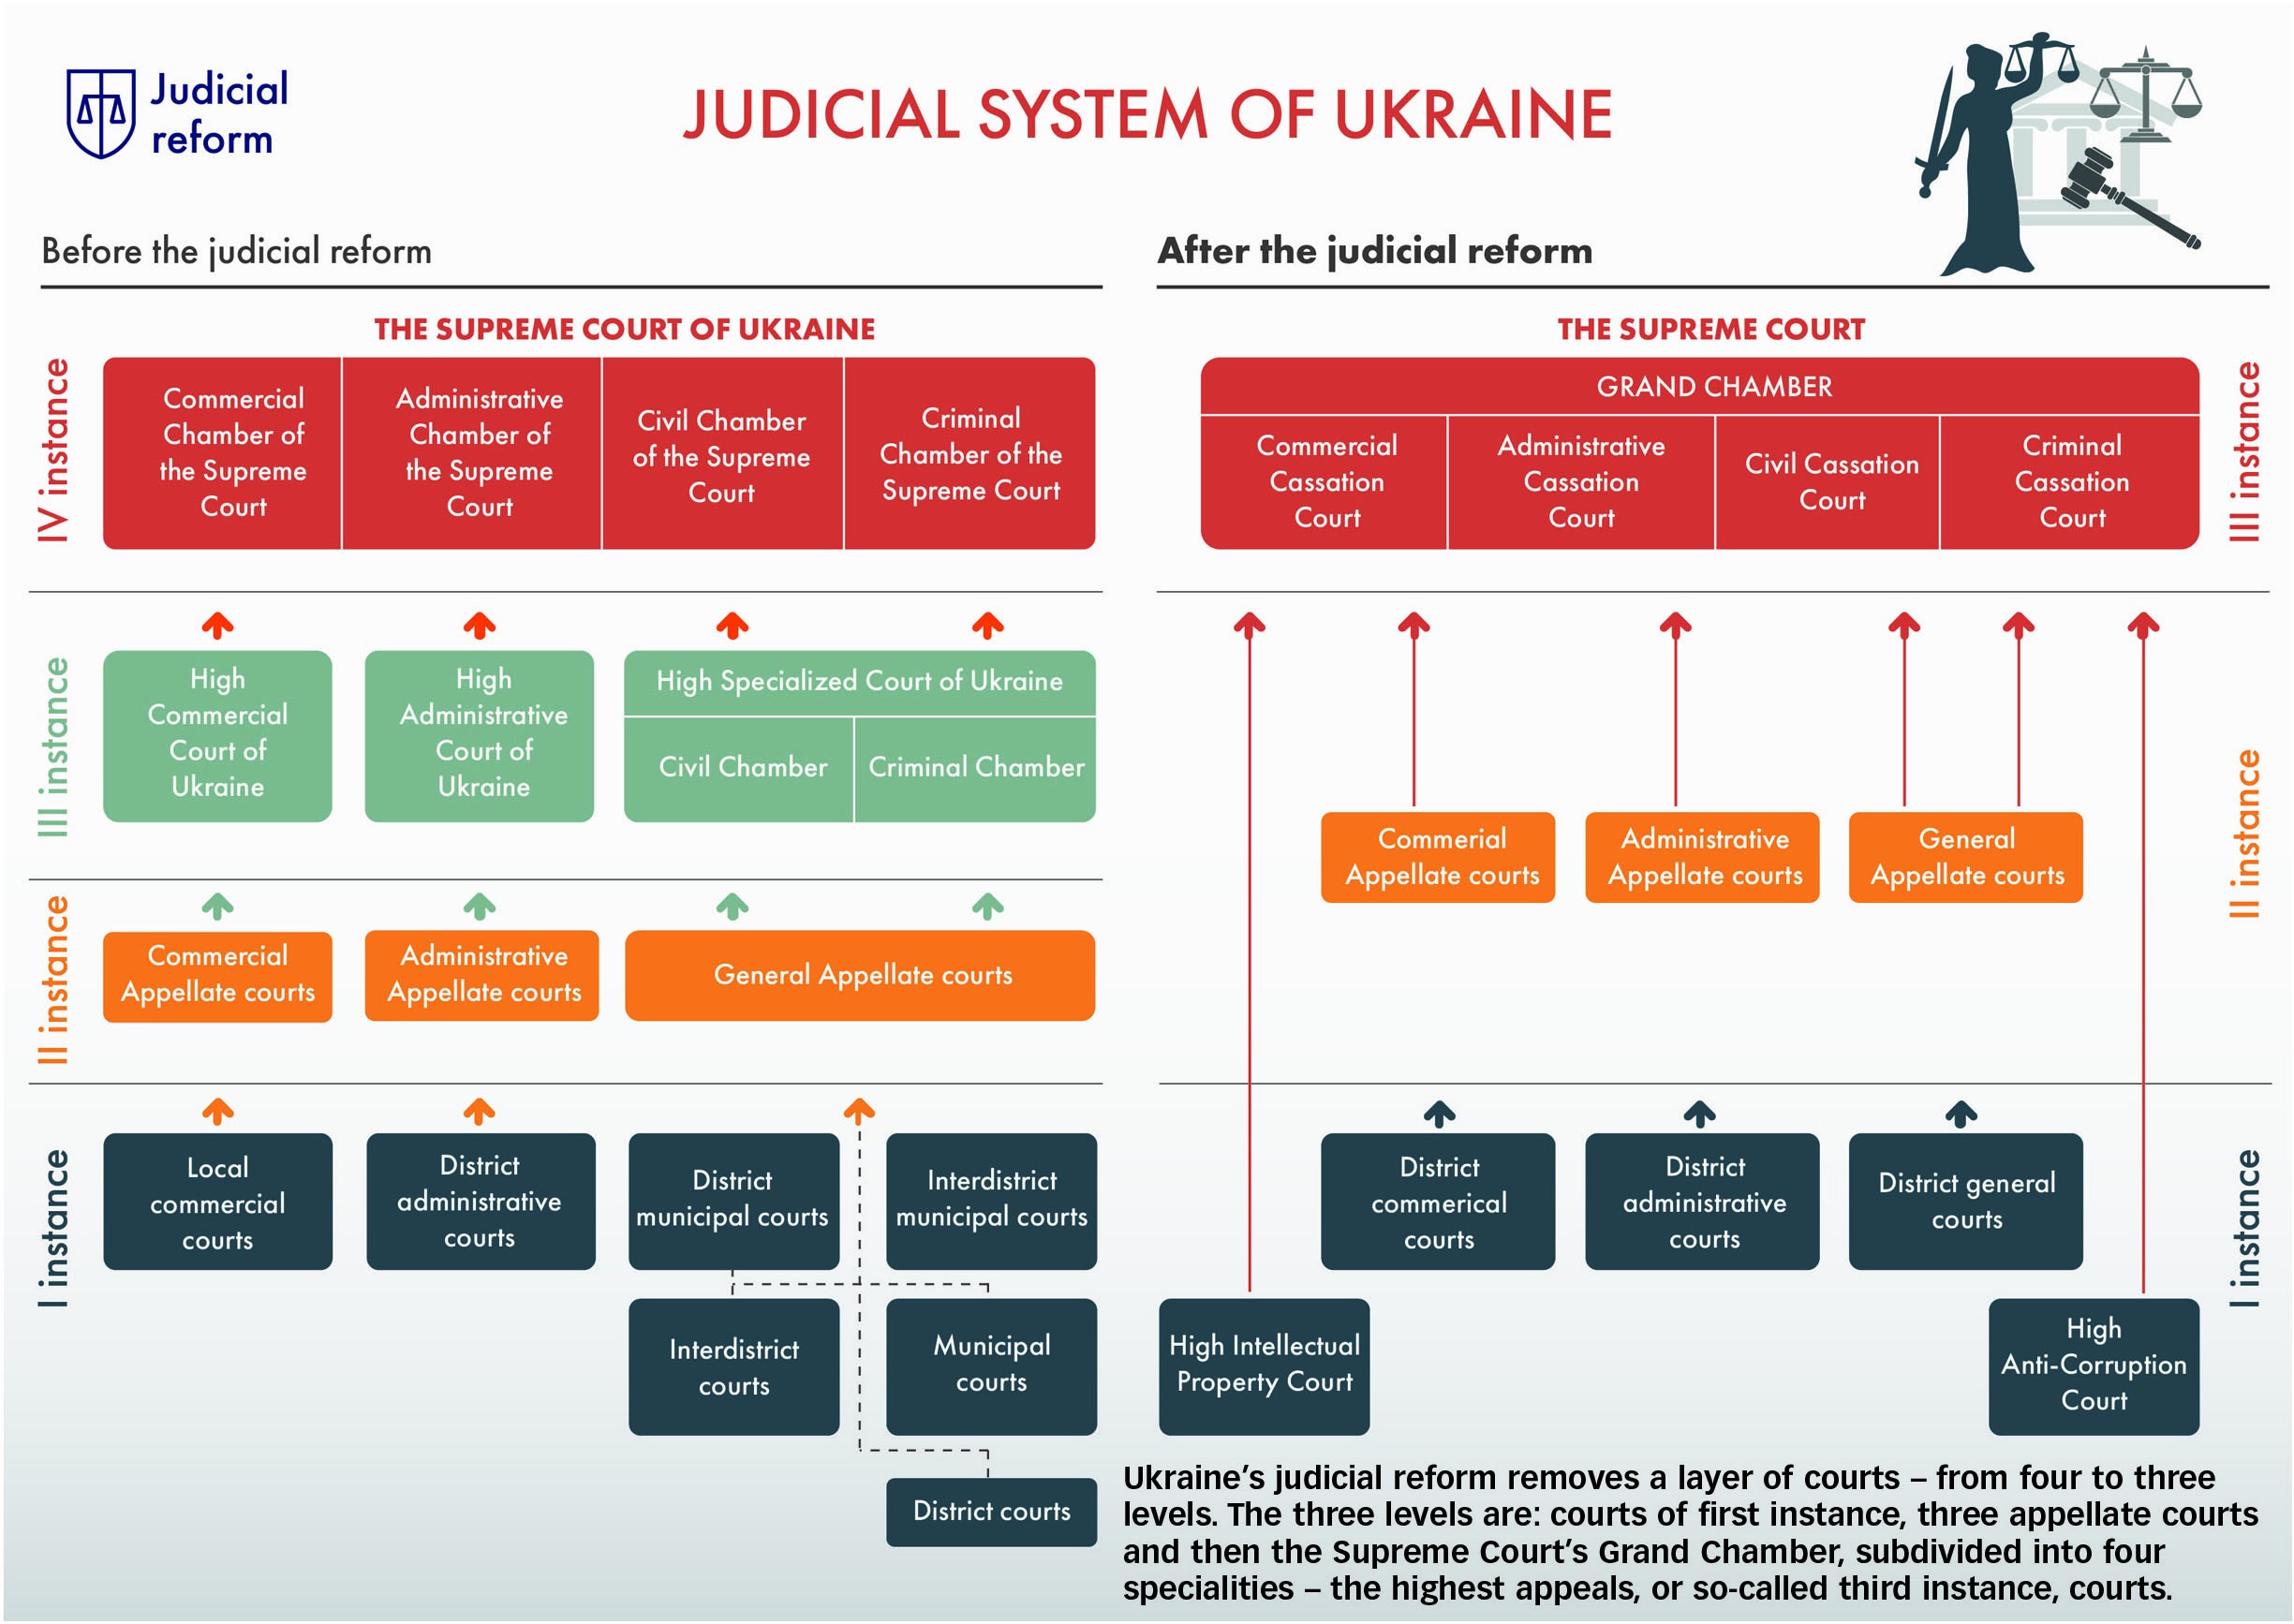 Ukraine’s judicial reform removes a layer of courts – from four to three levels. The three levels are: courts of first instance, three appellate courts and then the Supreme Court’s Grand Chamber, subdivided into four specialities – the highest appeals, or so-called third instance, courts.